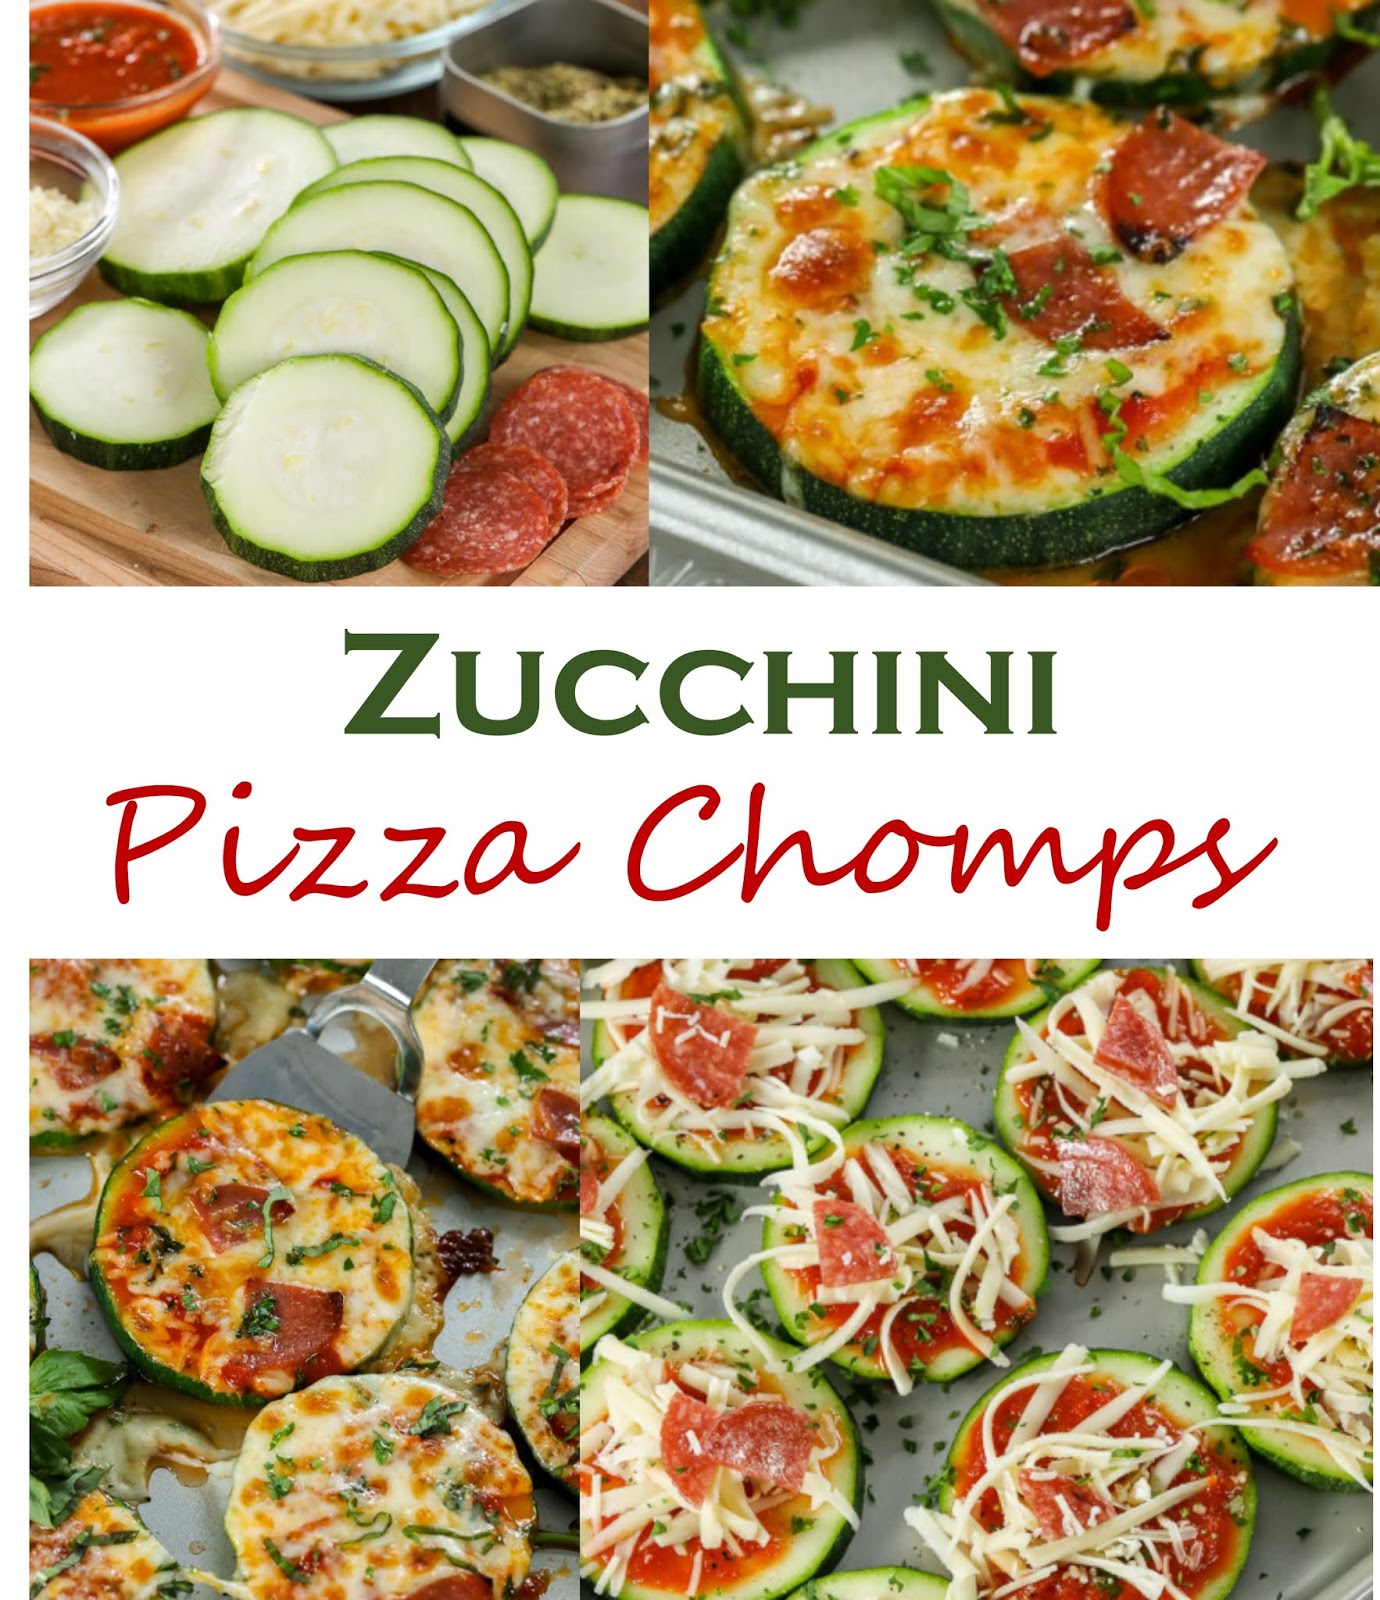 952 Reviews: THE BEST EVER #Recipes >> Zucchini Pizza Chomps - #mgid ...